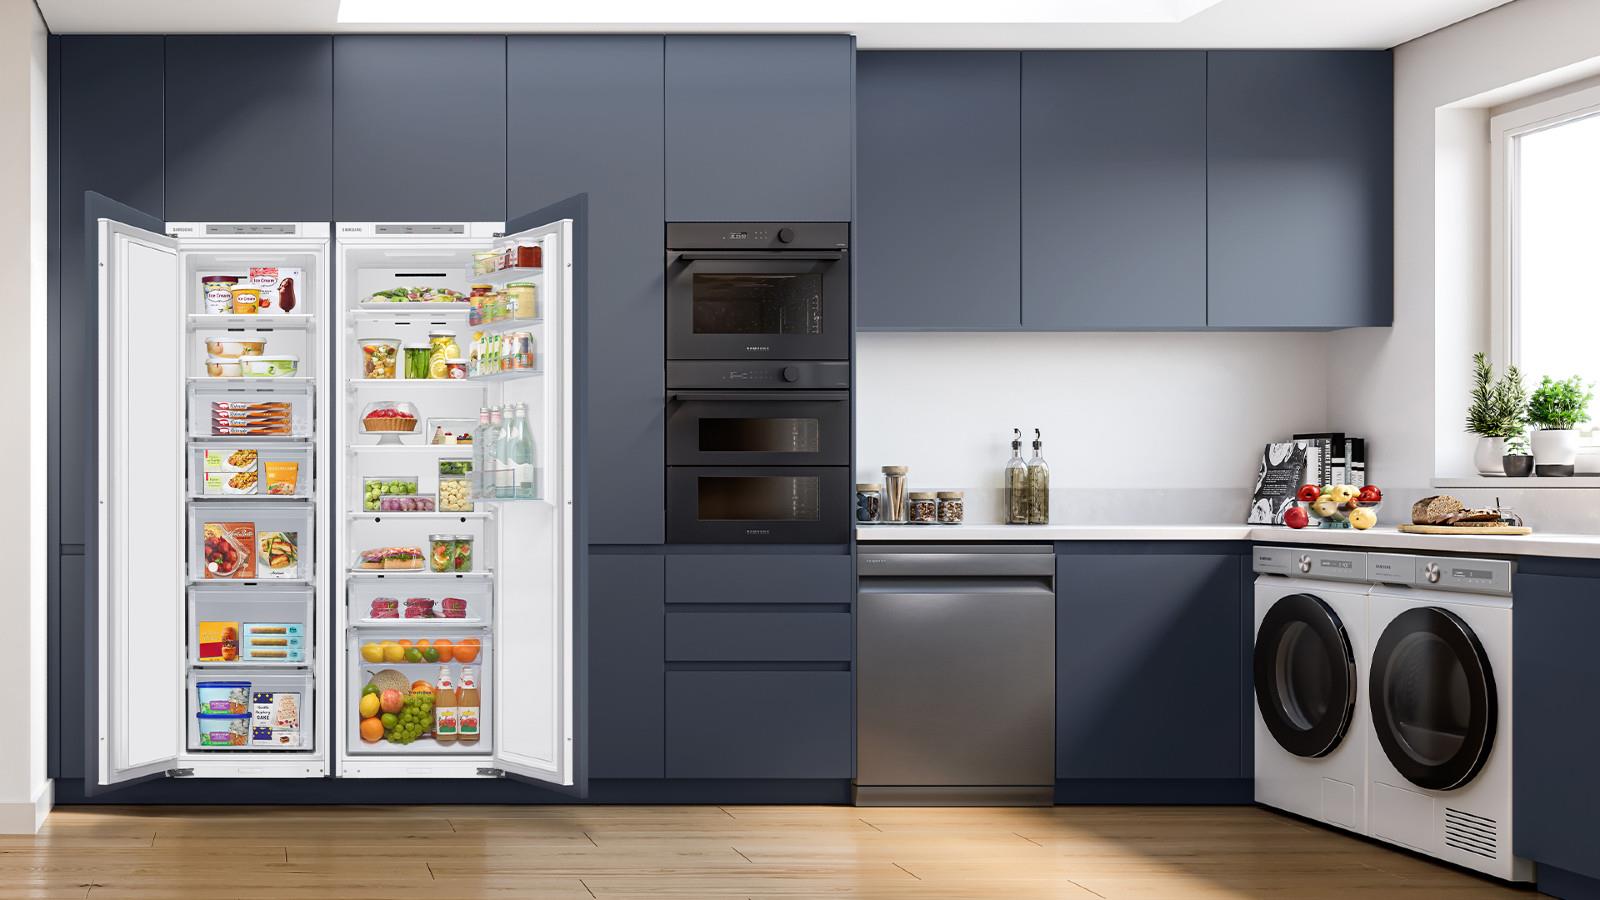 Häfele UK announces addition of Samsung to its appliances offering image